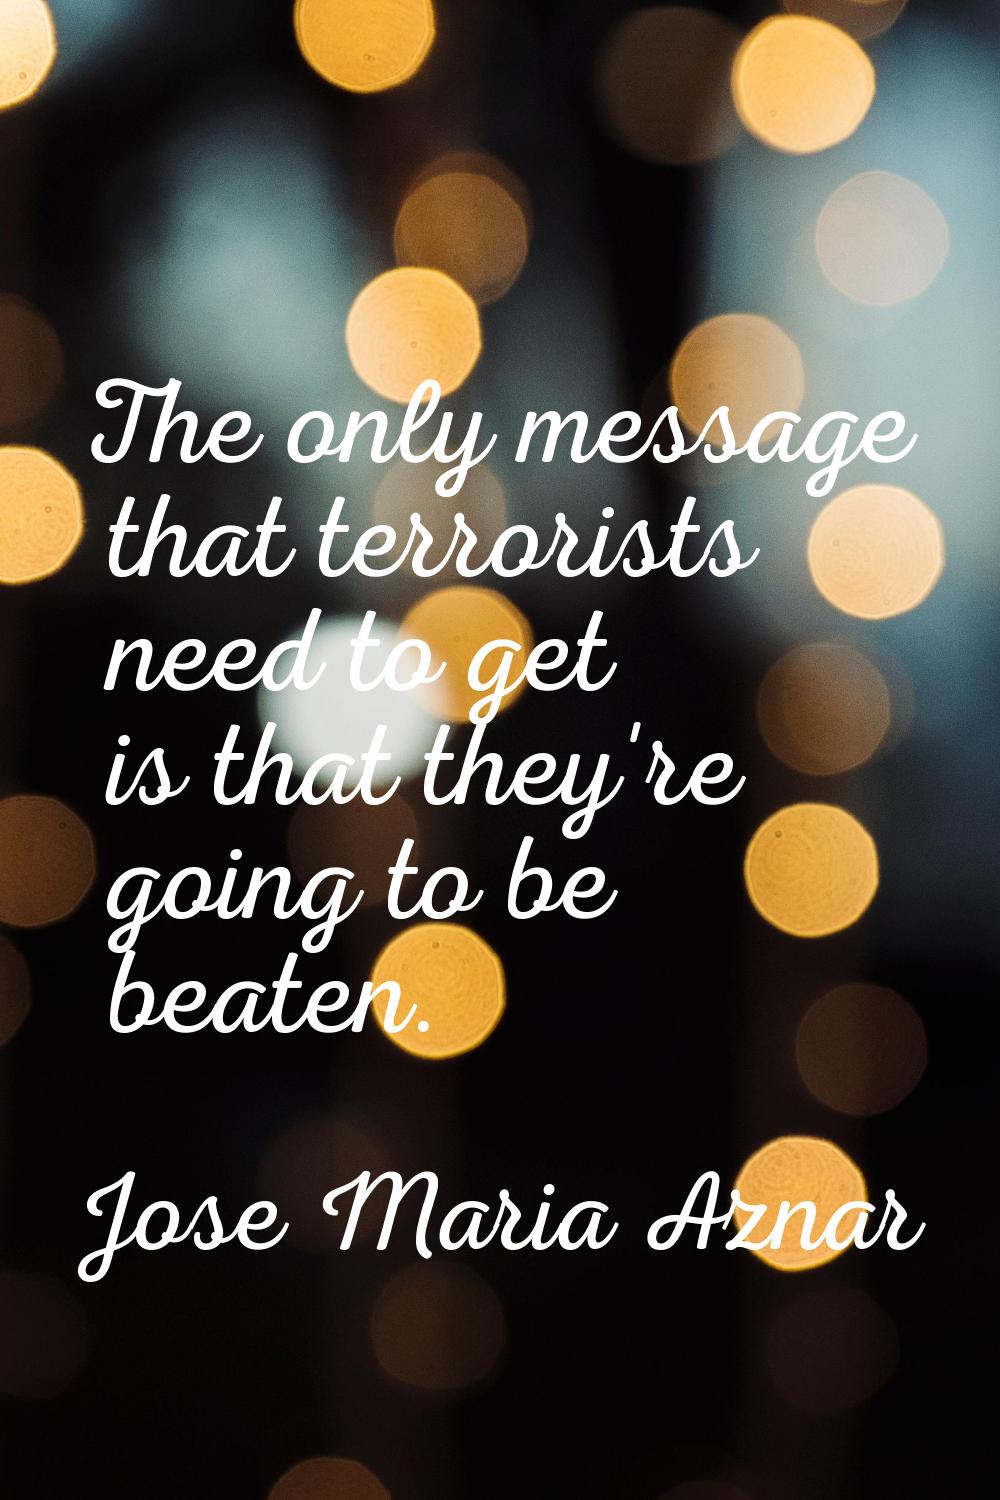 The only message that terrorists need to get is that they're going to be beaten.